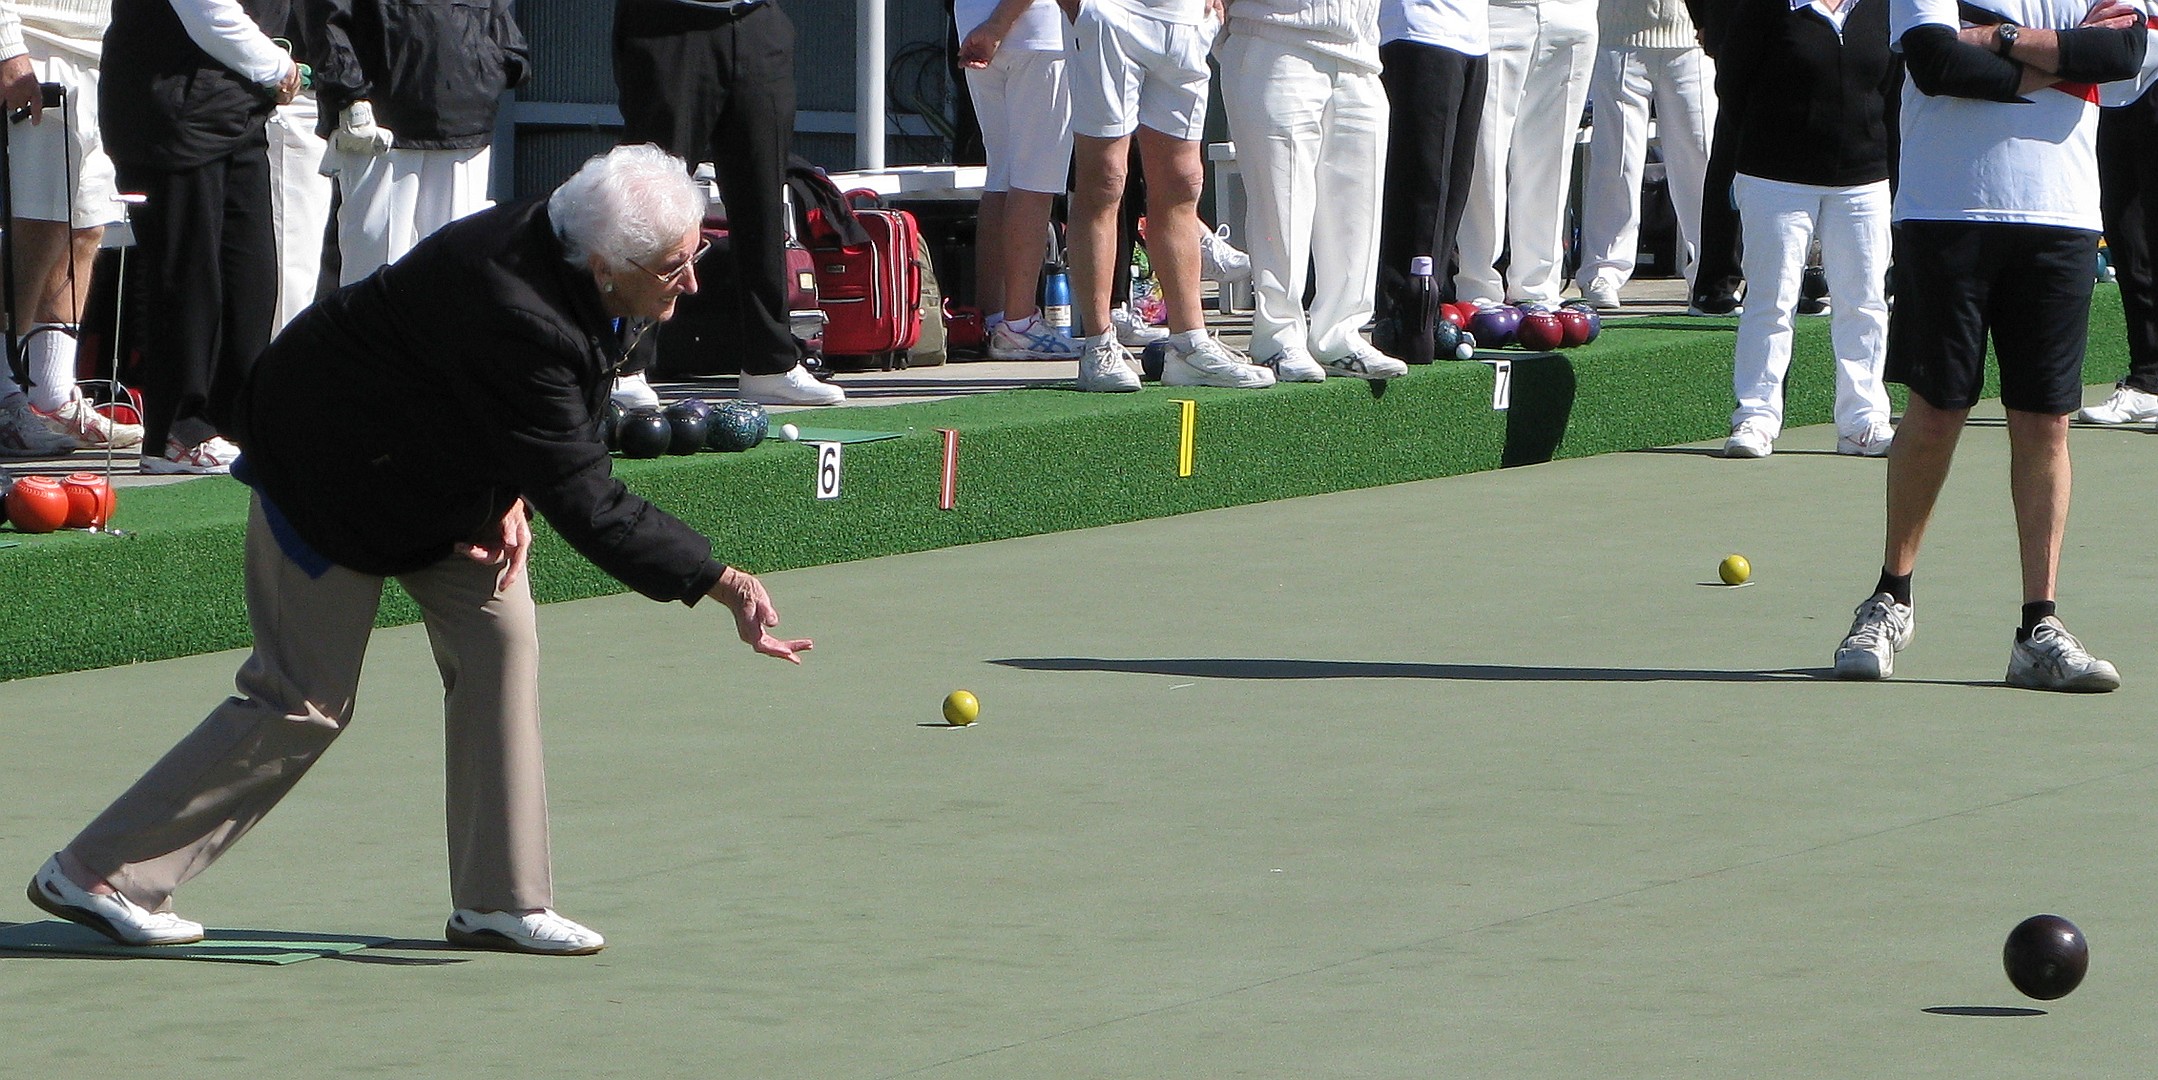 Summer Opening Day, The First Bowl Delivered by Jean Hewitt - 19 September 2020